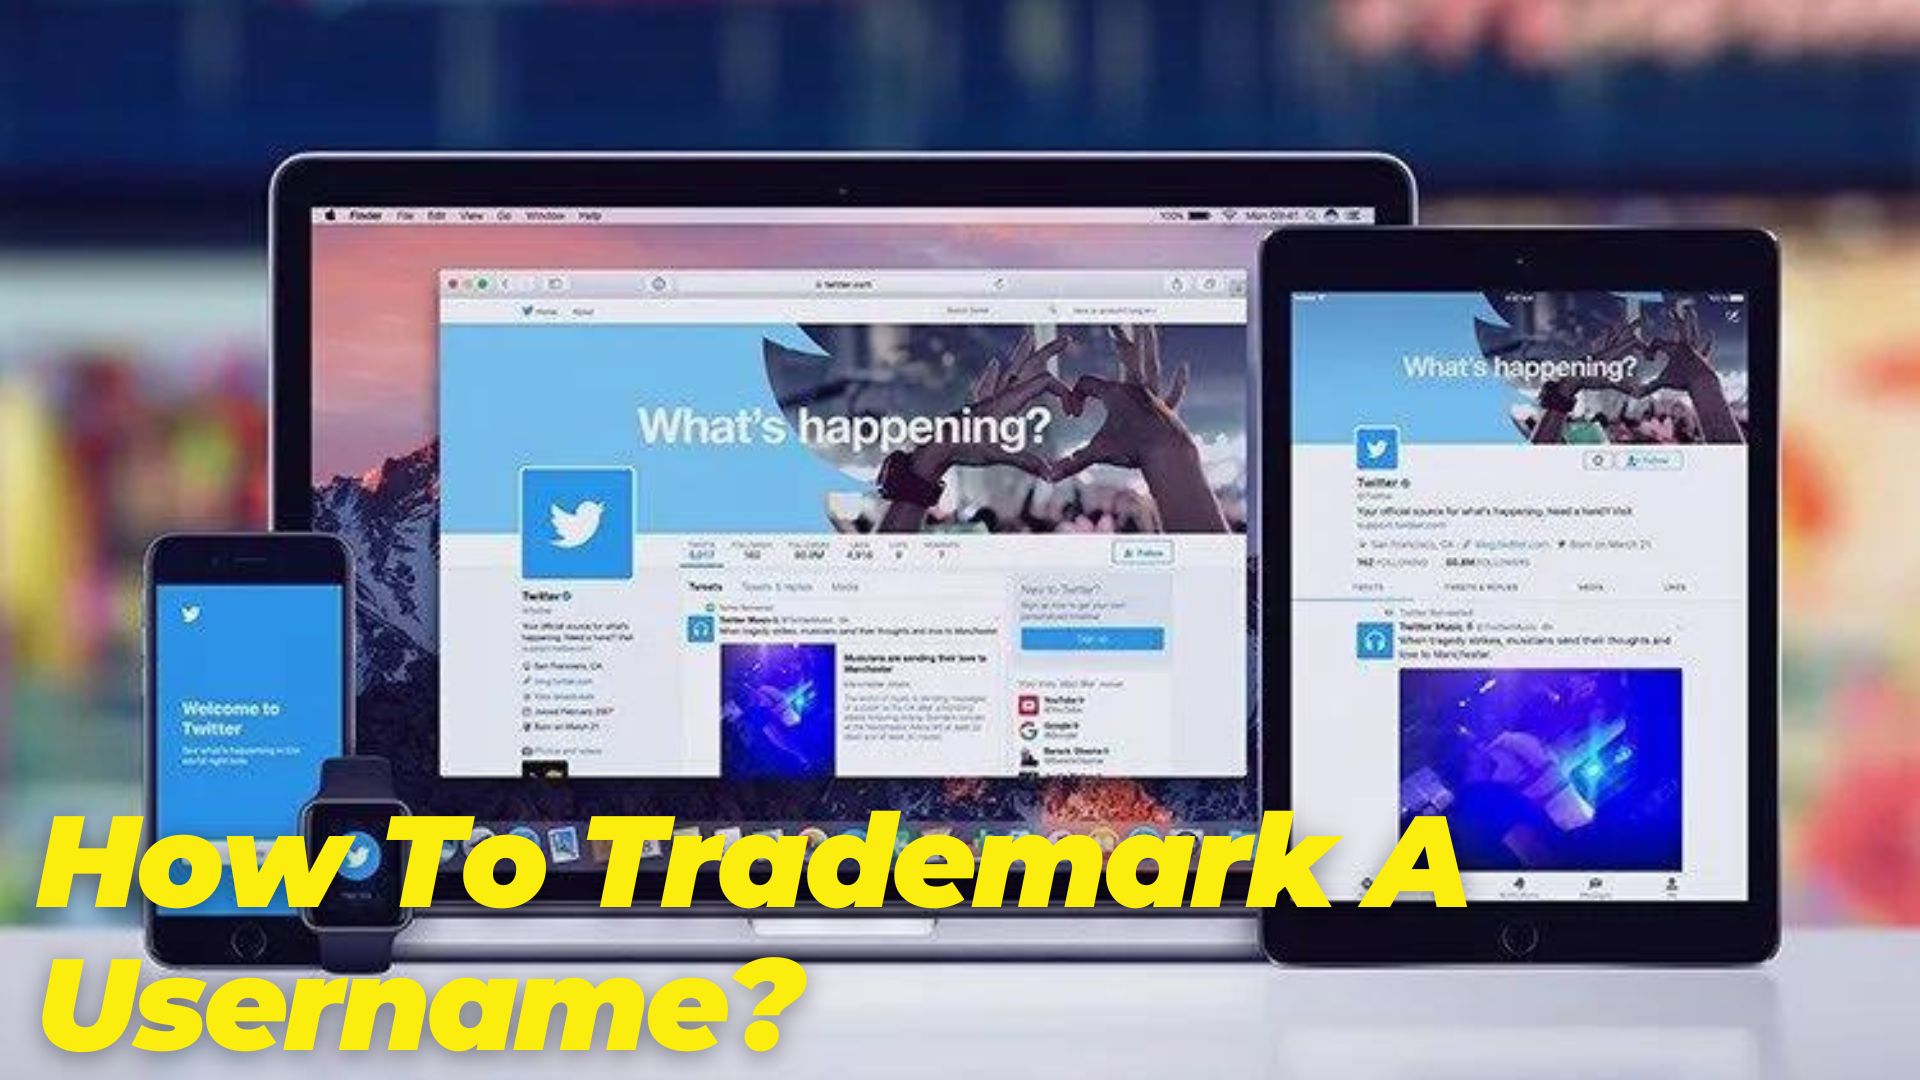 How To Trademark A Username?